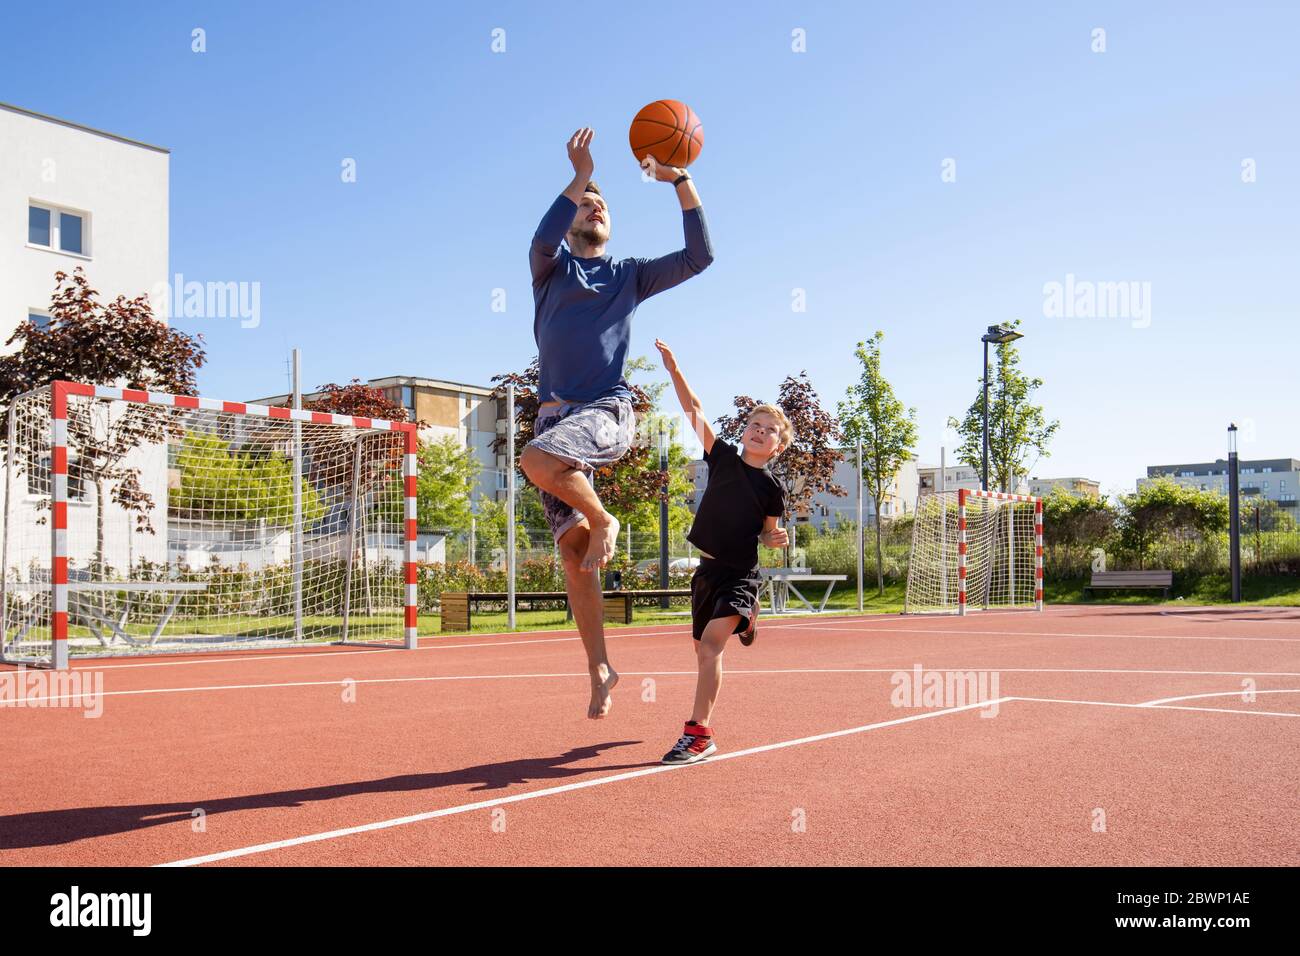 Dad and son playing basketball barefoot with the ball on a playground Stock Photo